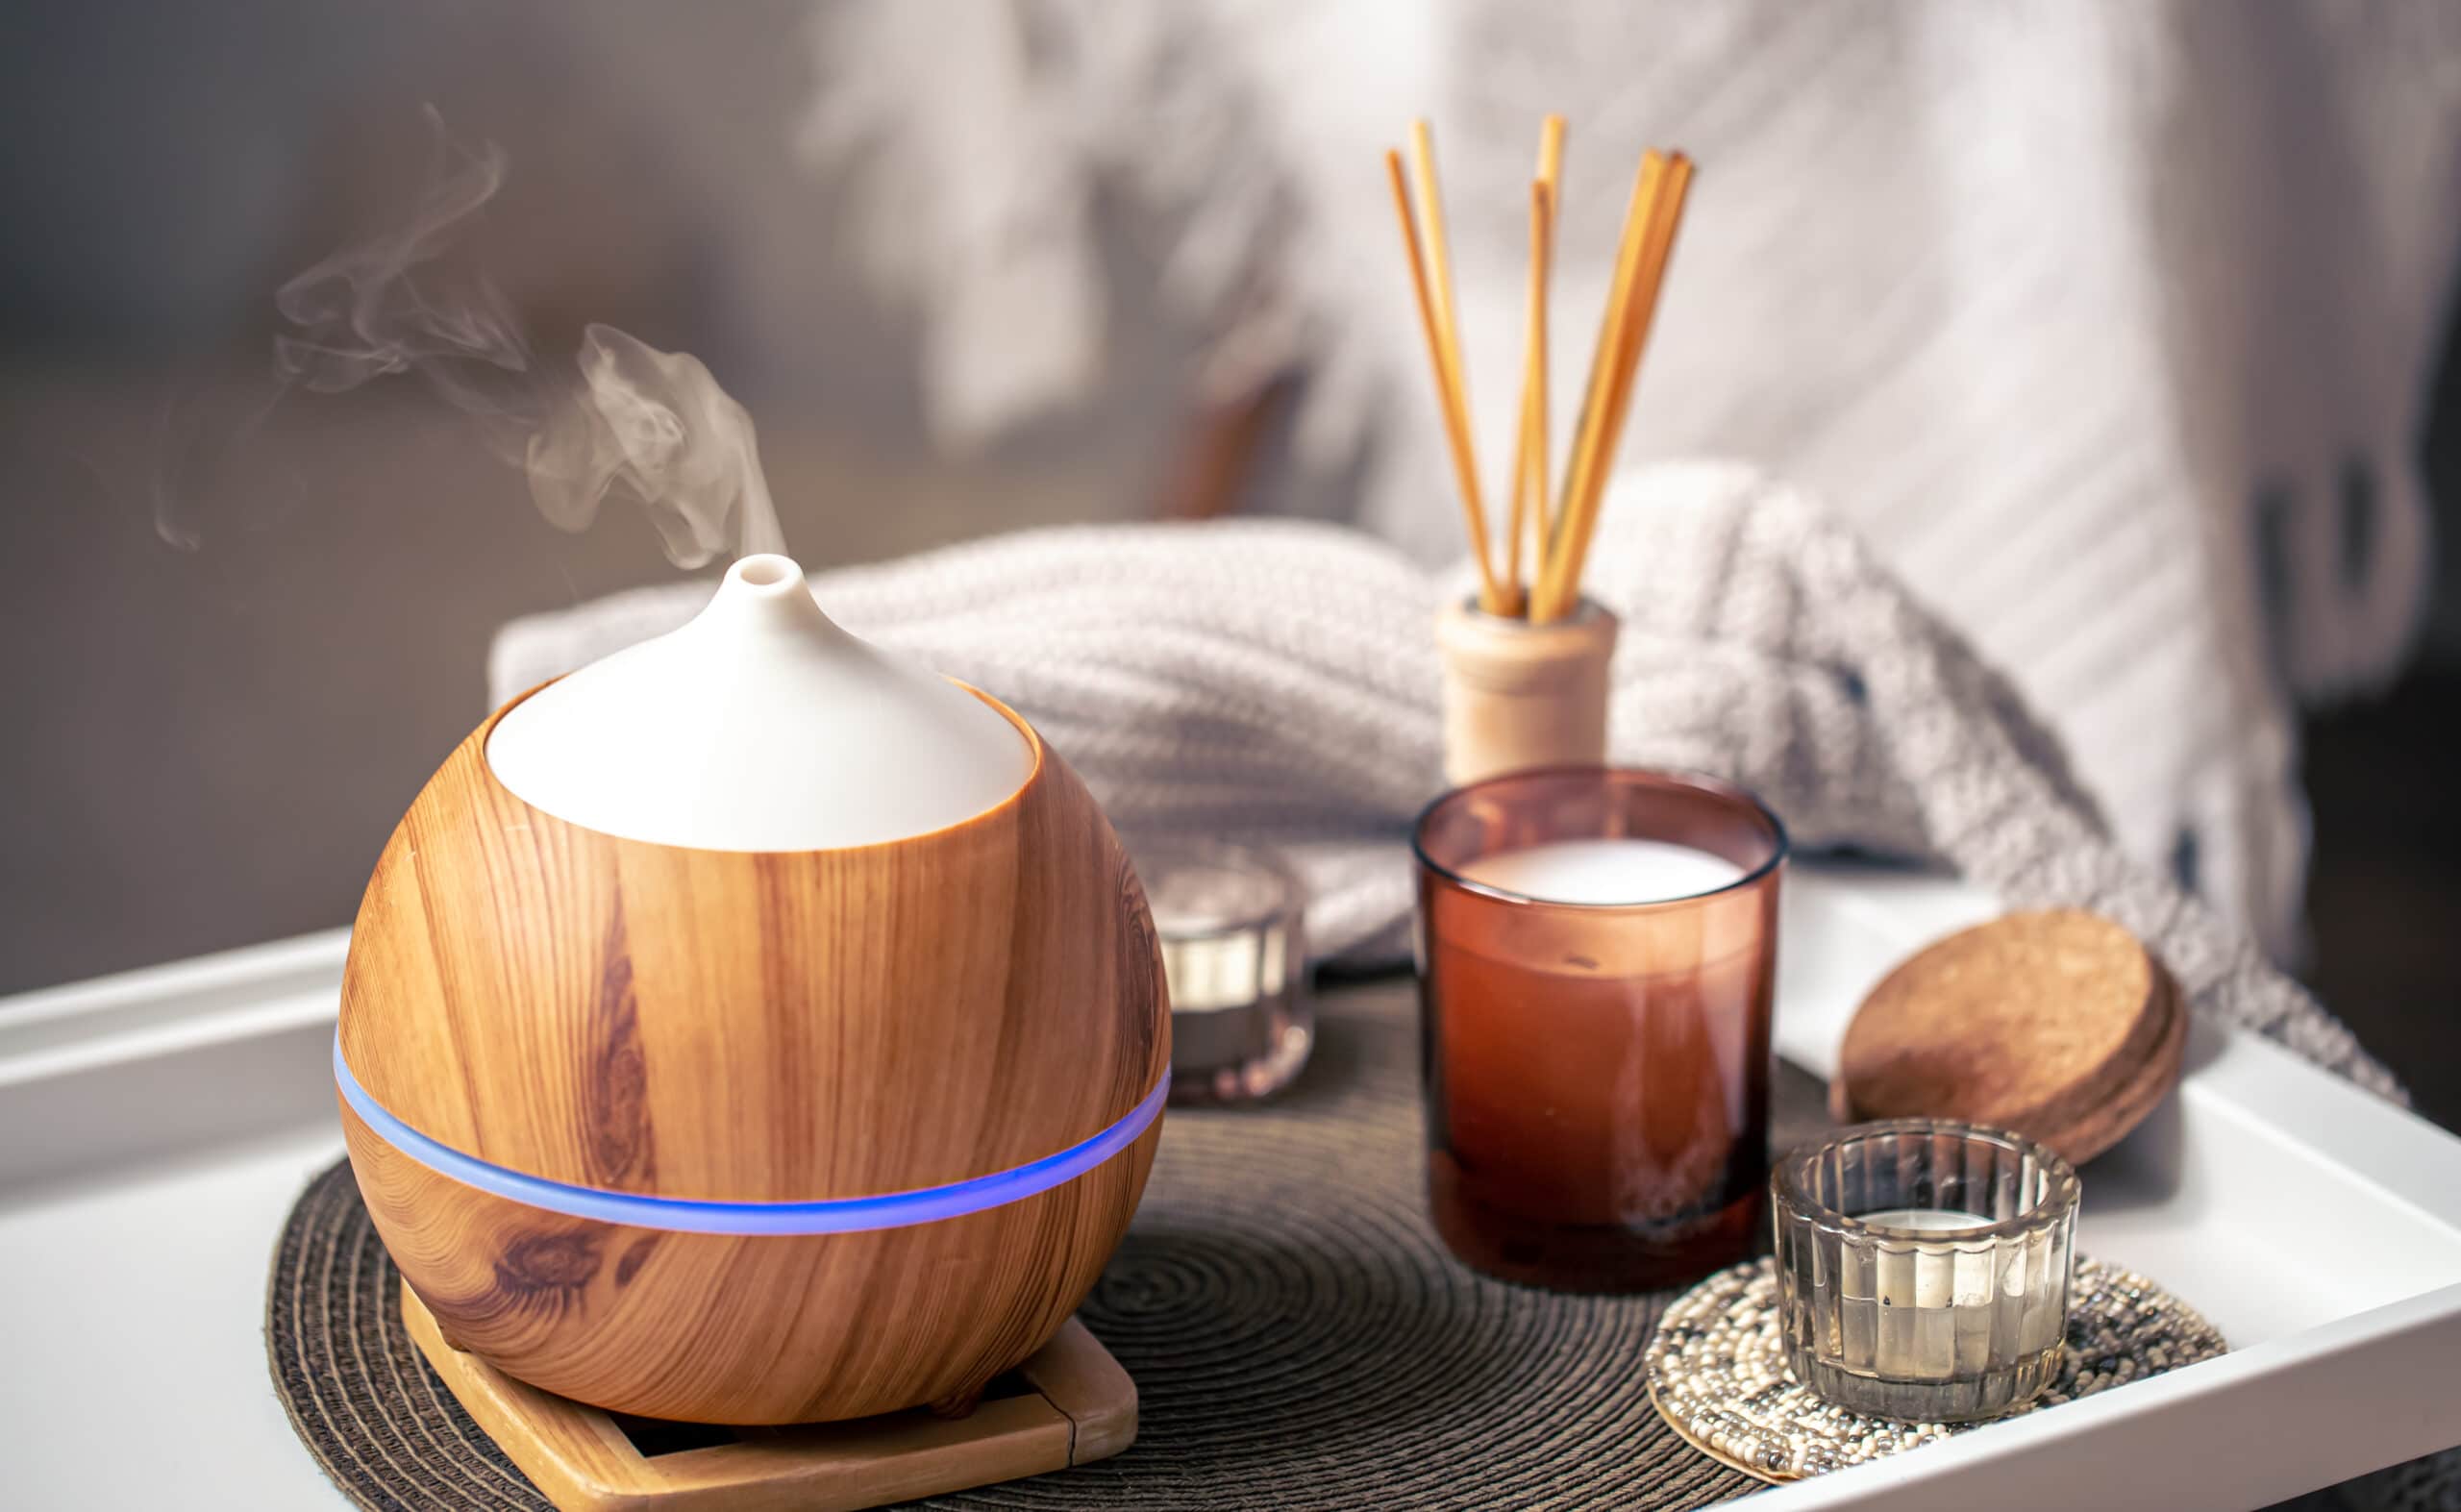 A cozy ambiance with a candle and a soothing aroma diffuser, while a dehumidifier keeps the air fresh and moisture-free.